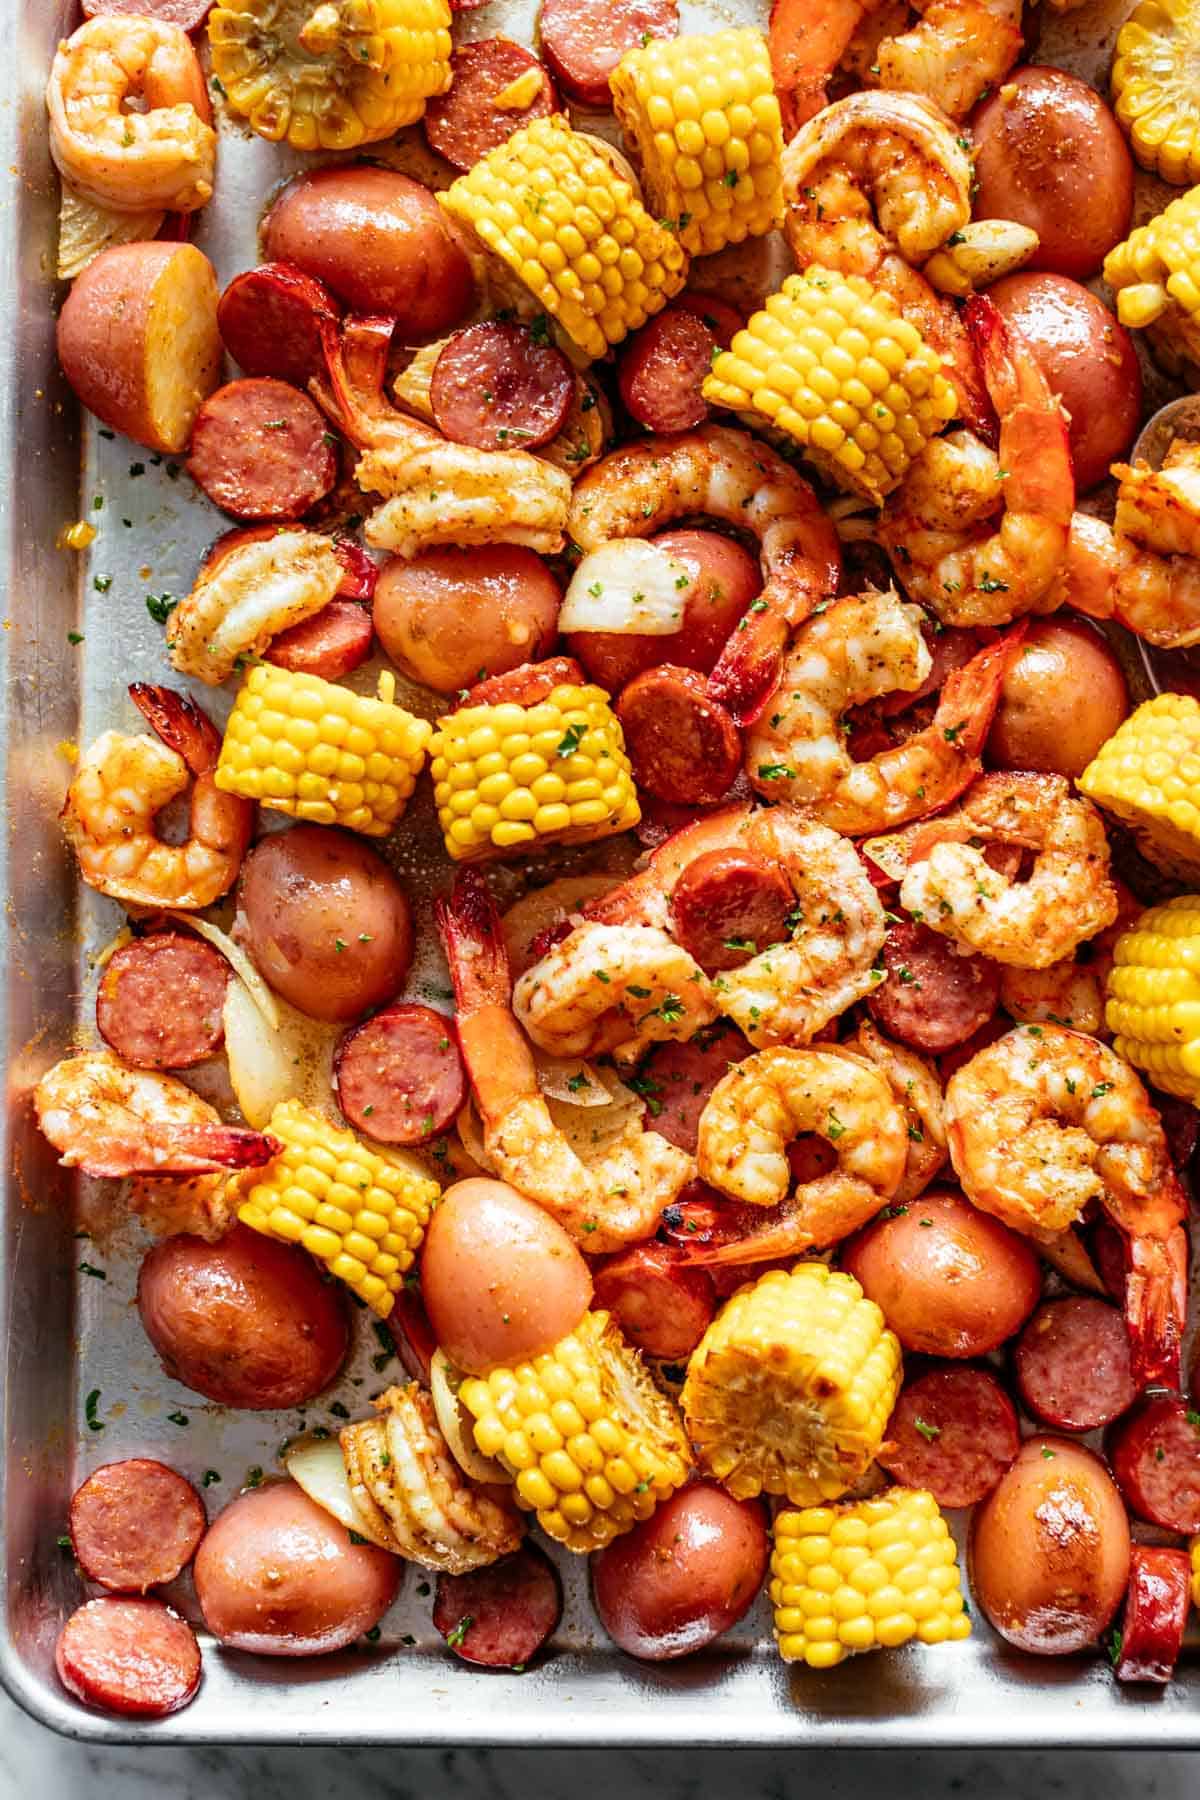 Shrimp Boil smothered in garlic butter and Old Bay seasoning made easy in the oven. Ready in 30 minutes! | cafedelites.com